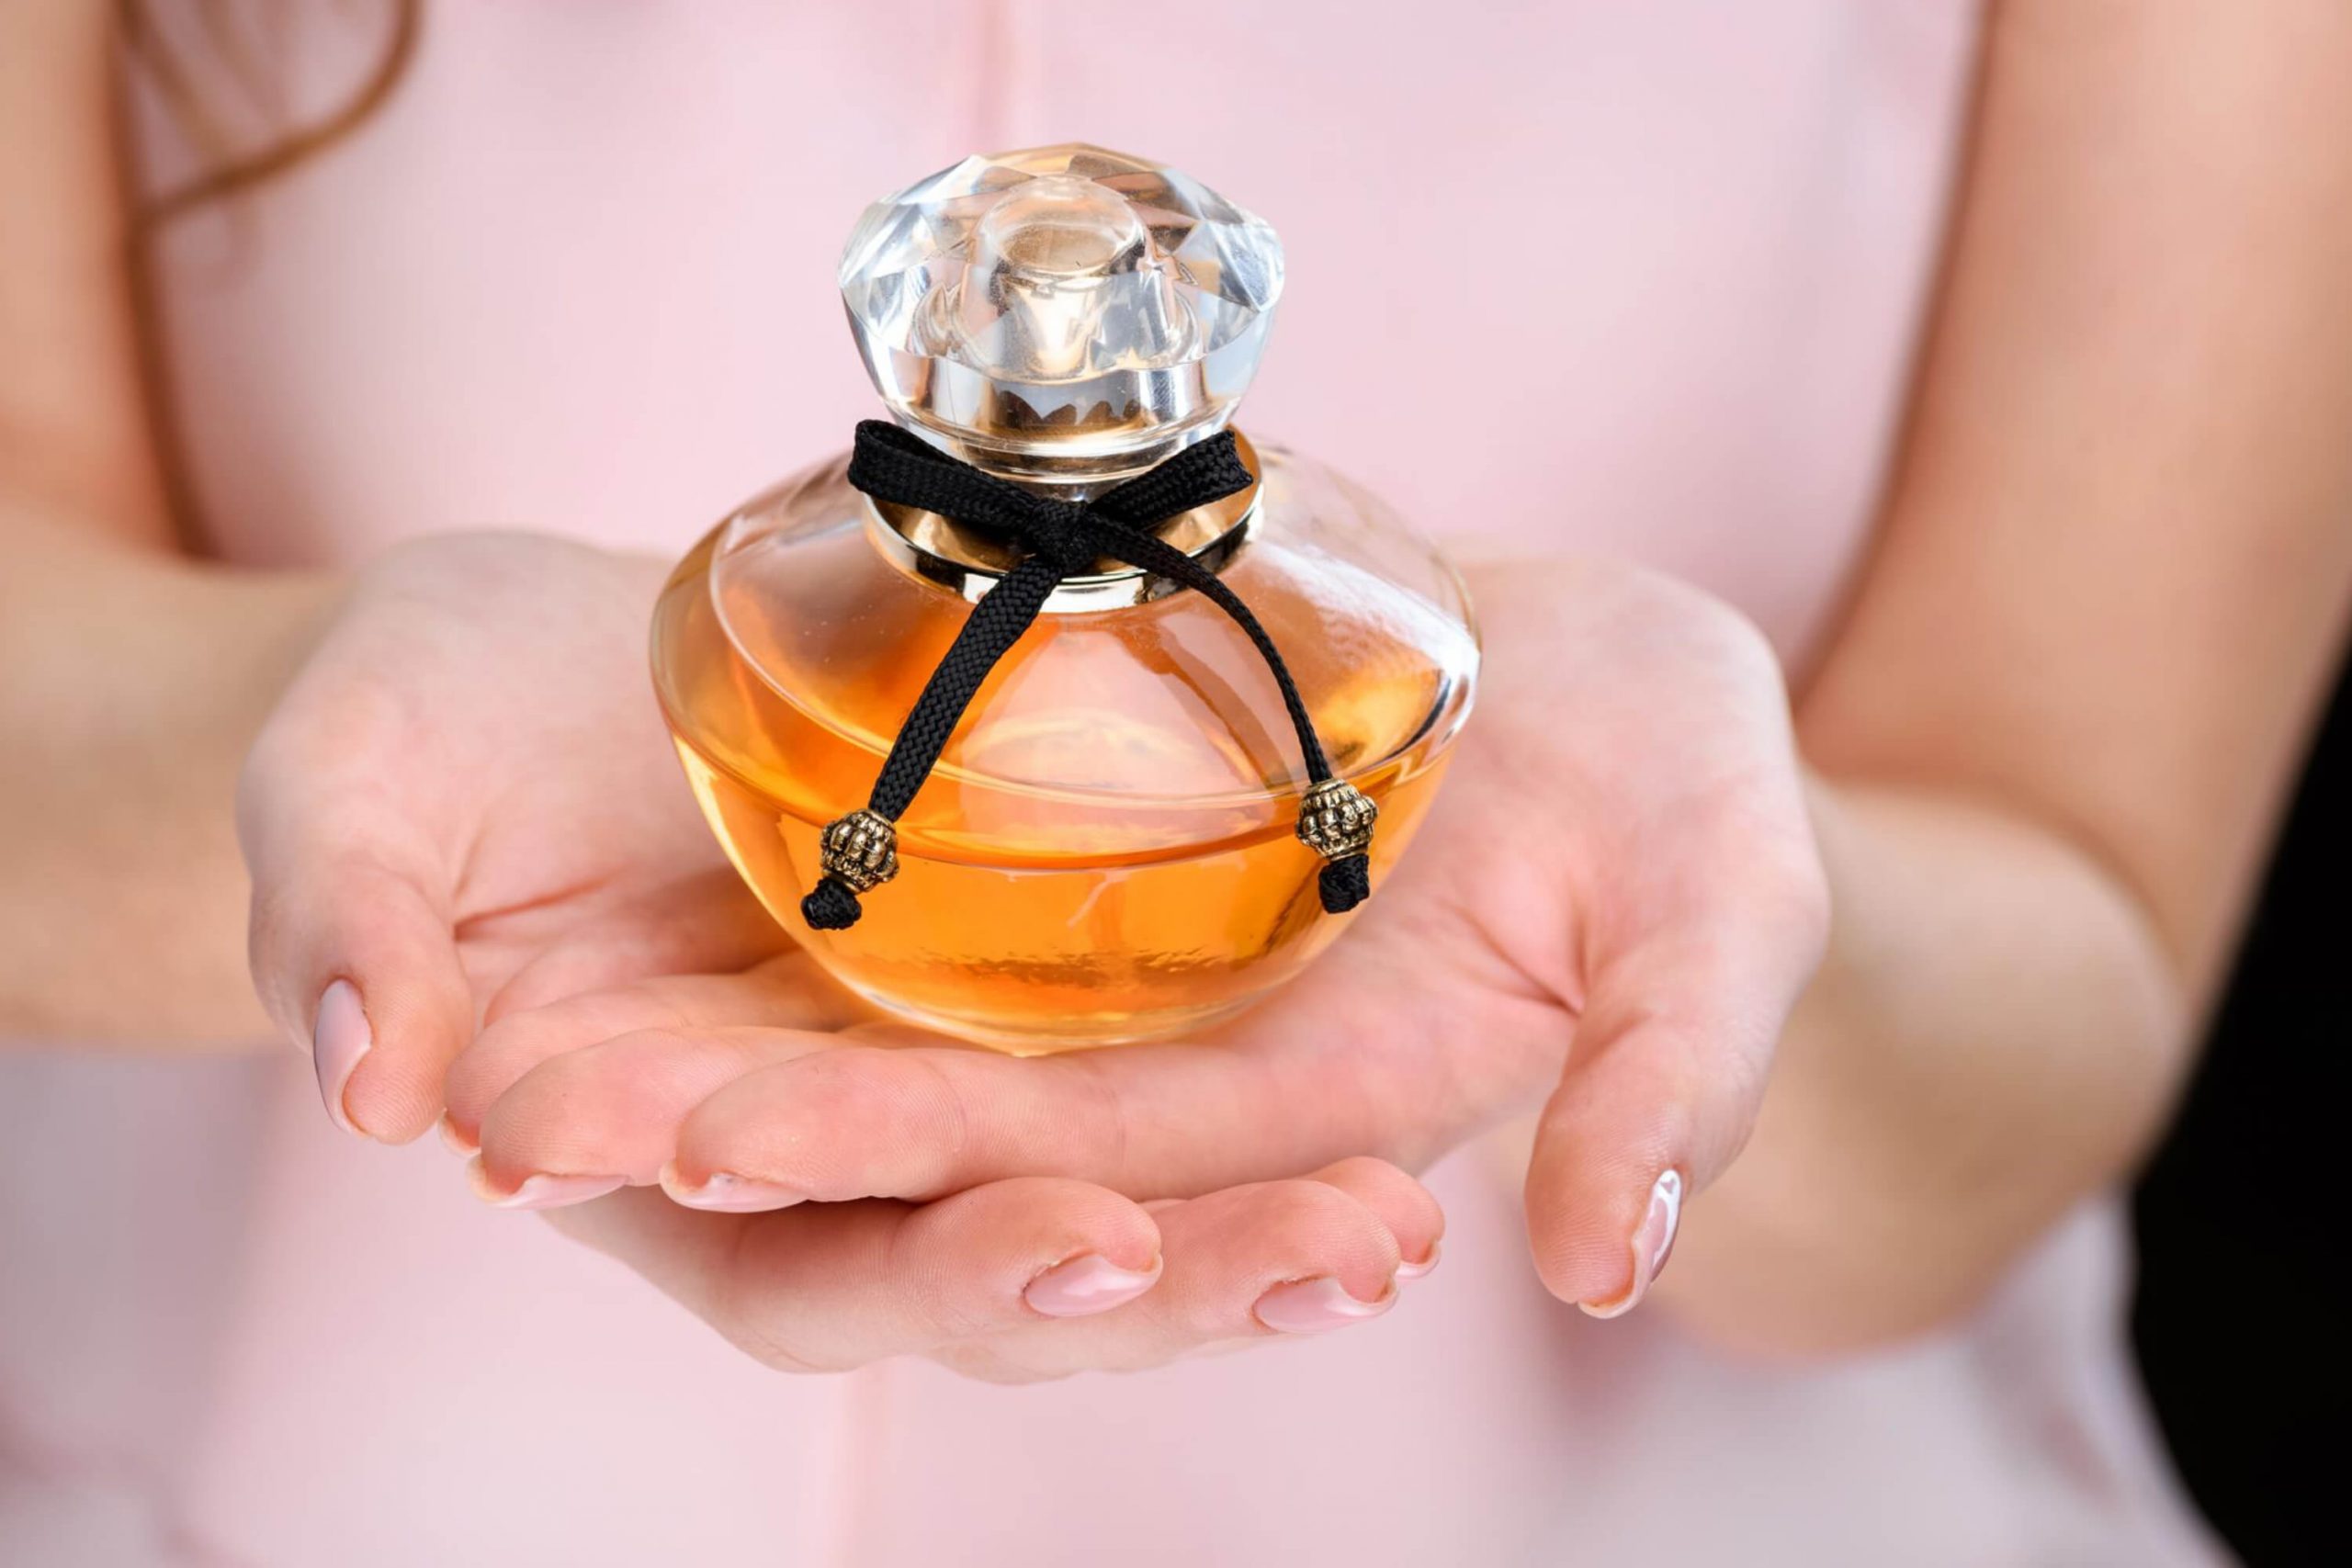 Perfume as a special gift